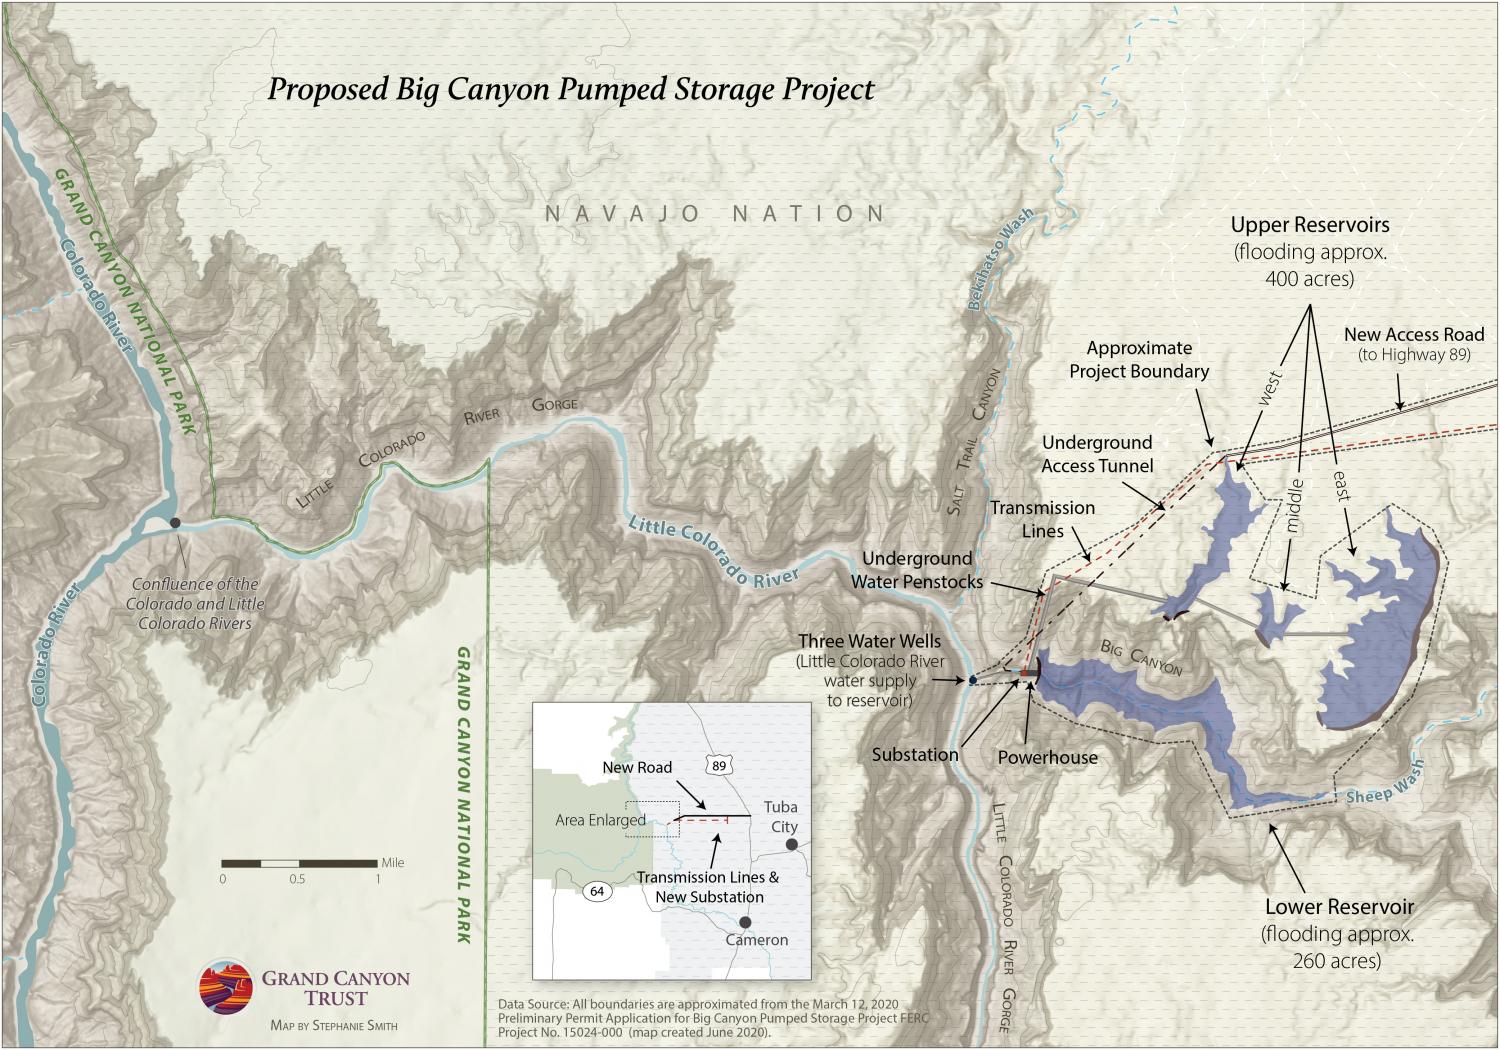 Map of the proposed Big Canyon Pumped Storage Project